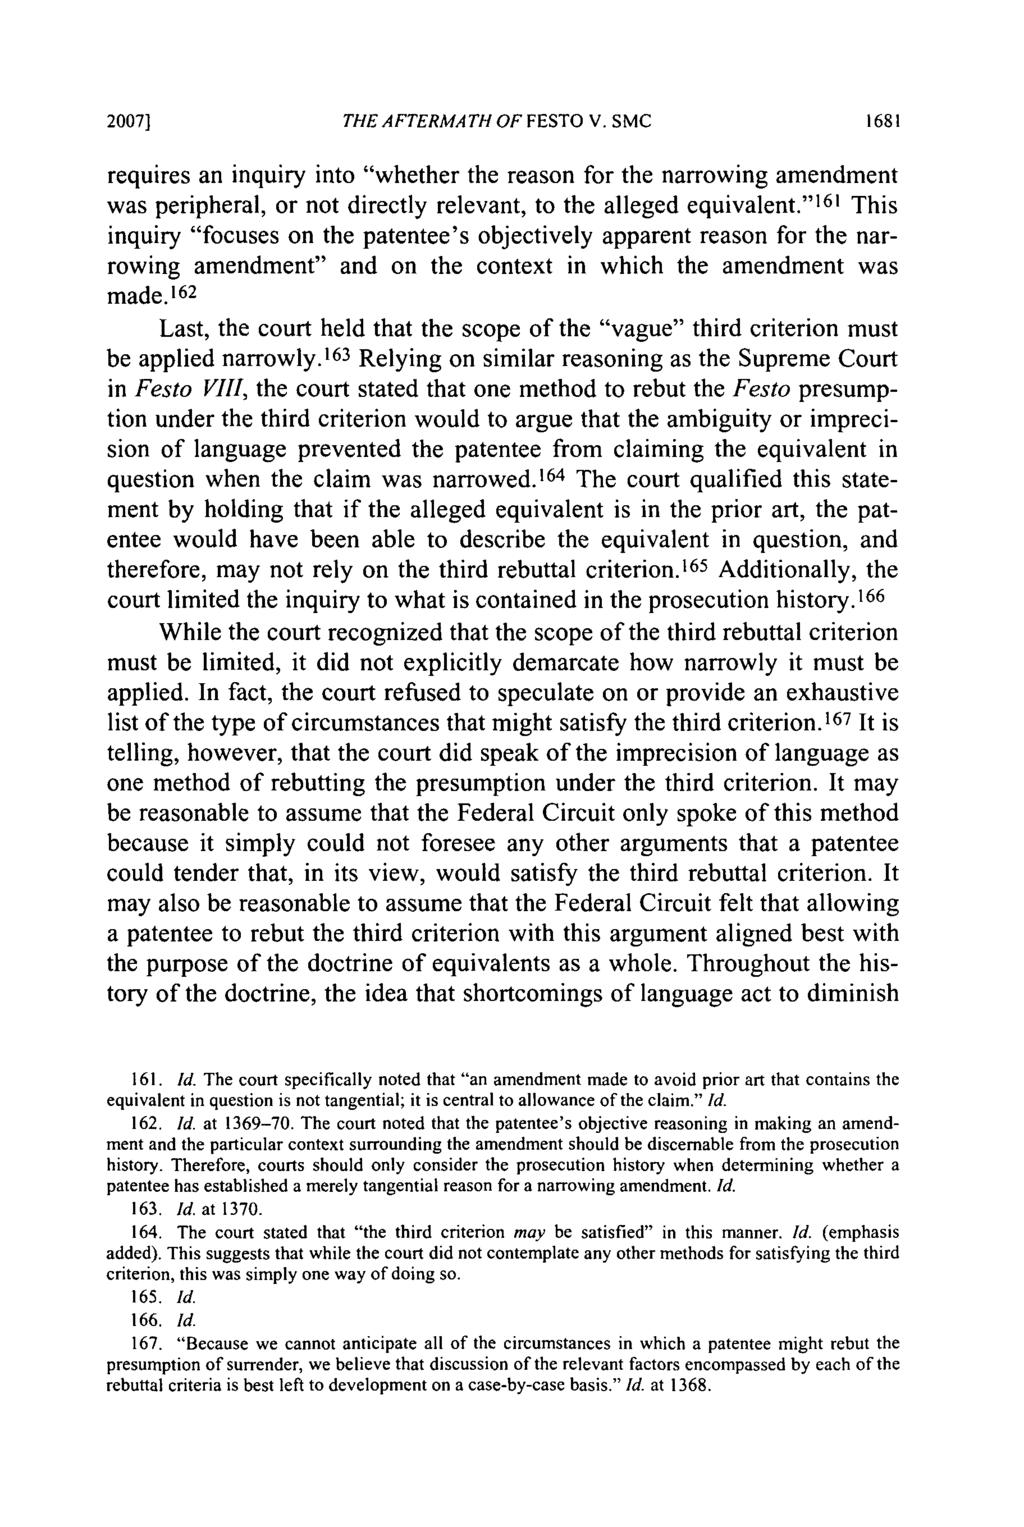 2007] THE AFTERMATH OF FESTO V. SMC requires an inquiry into "whether the reason for the narrowing amendment was peripheral, or not directly relevant, to the alleged equivalent.